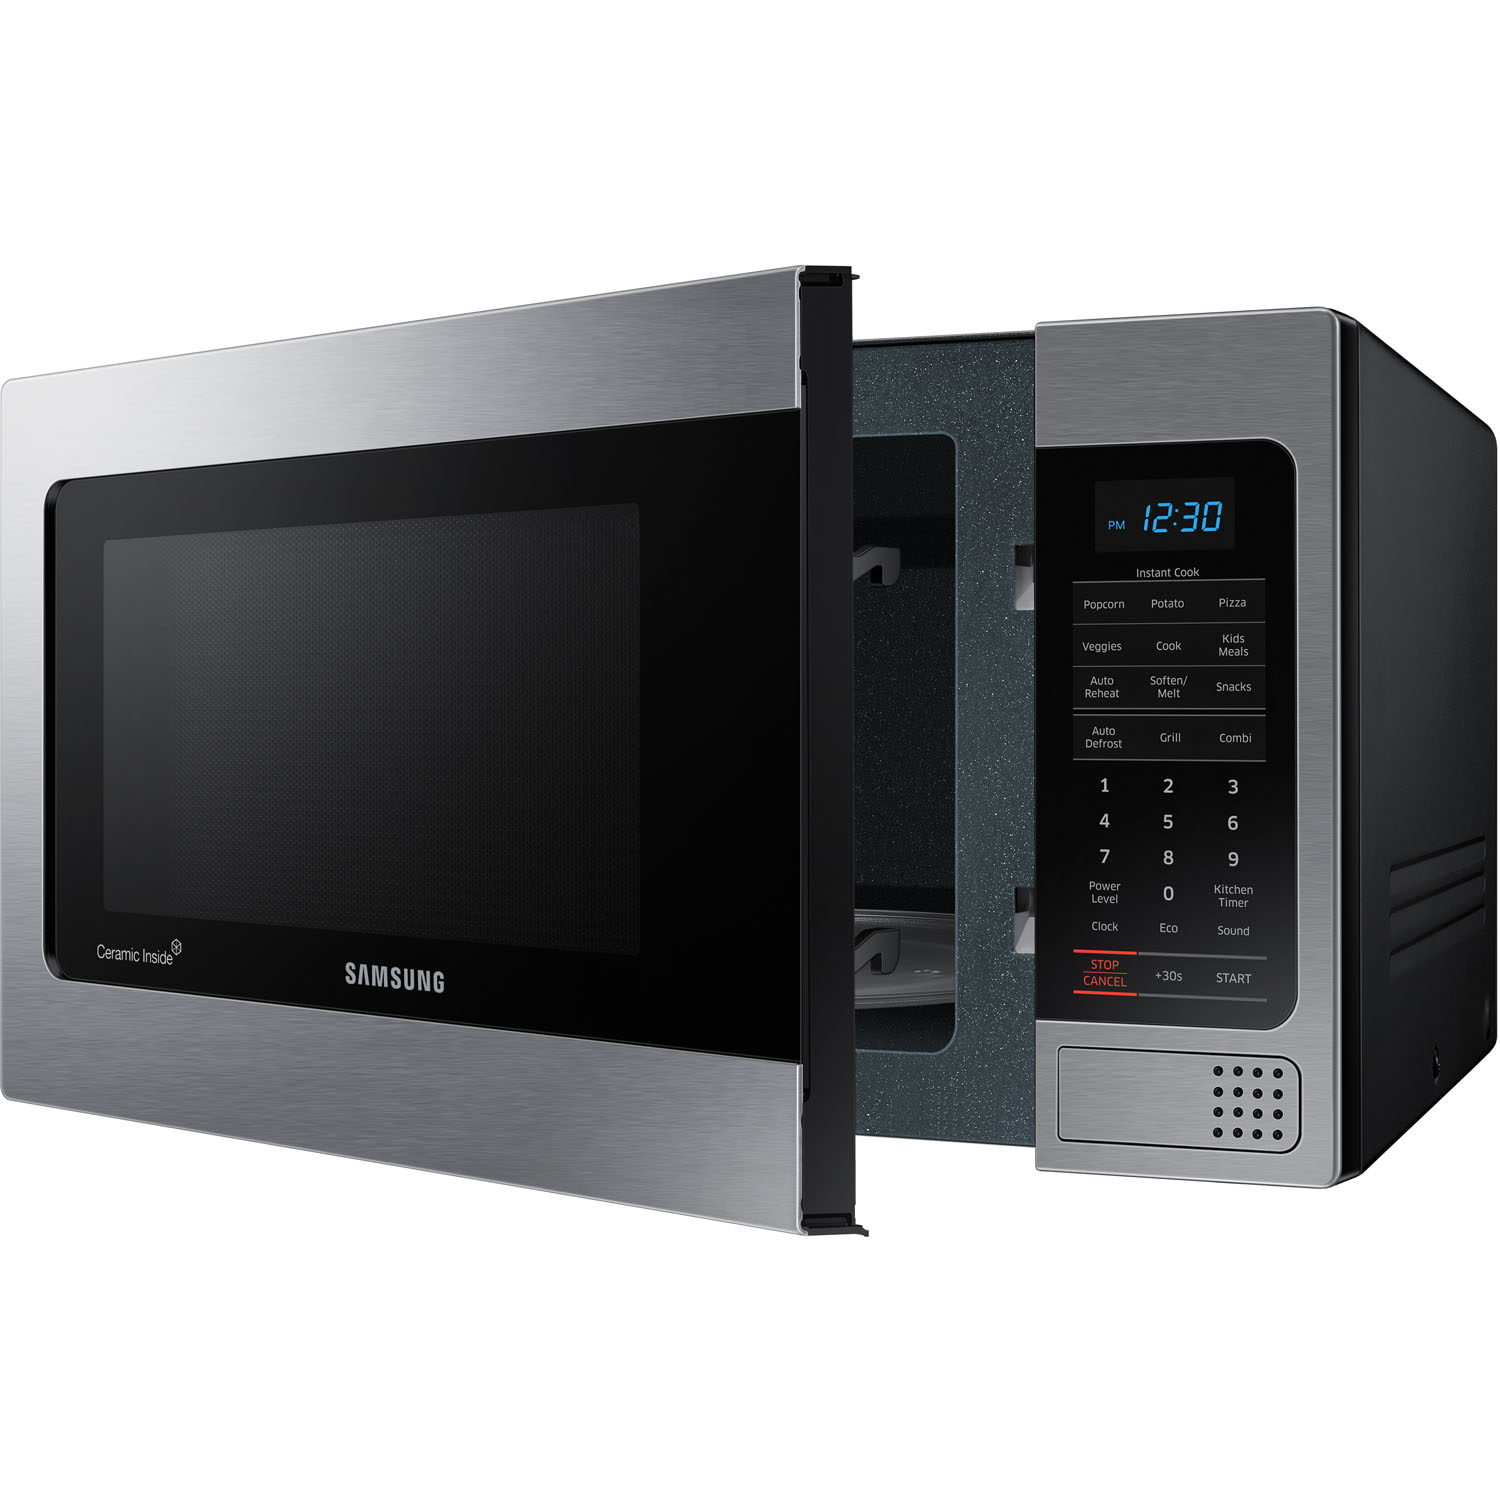 Samsung 1.1 cu. ft. Counter Top Microwave - Stainless Steel - image 3 of 6